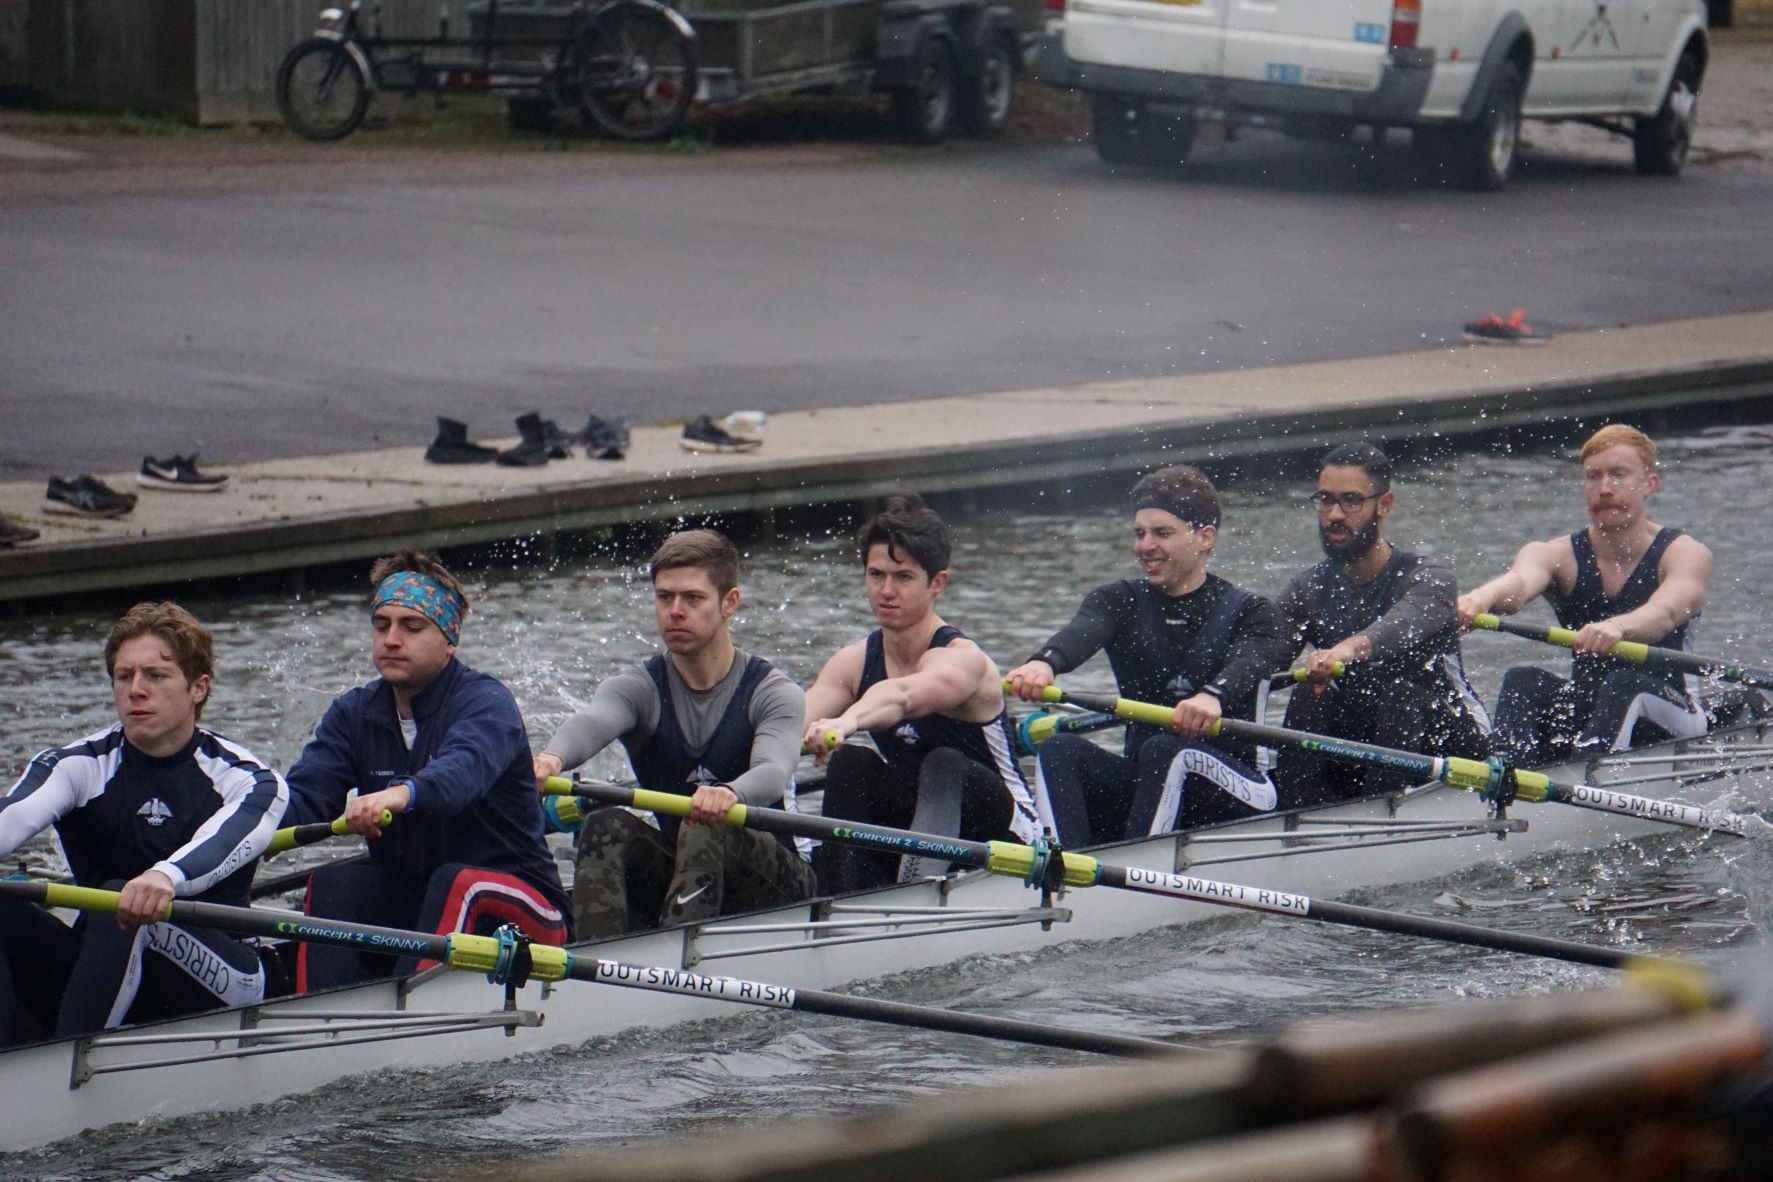 The College Senior boat crew in the boat on the River Cam